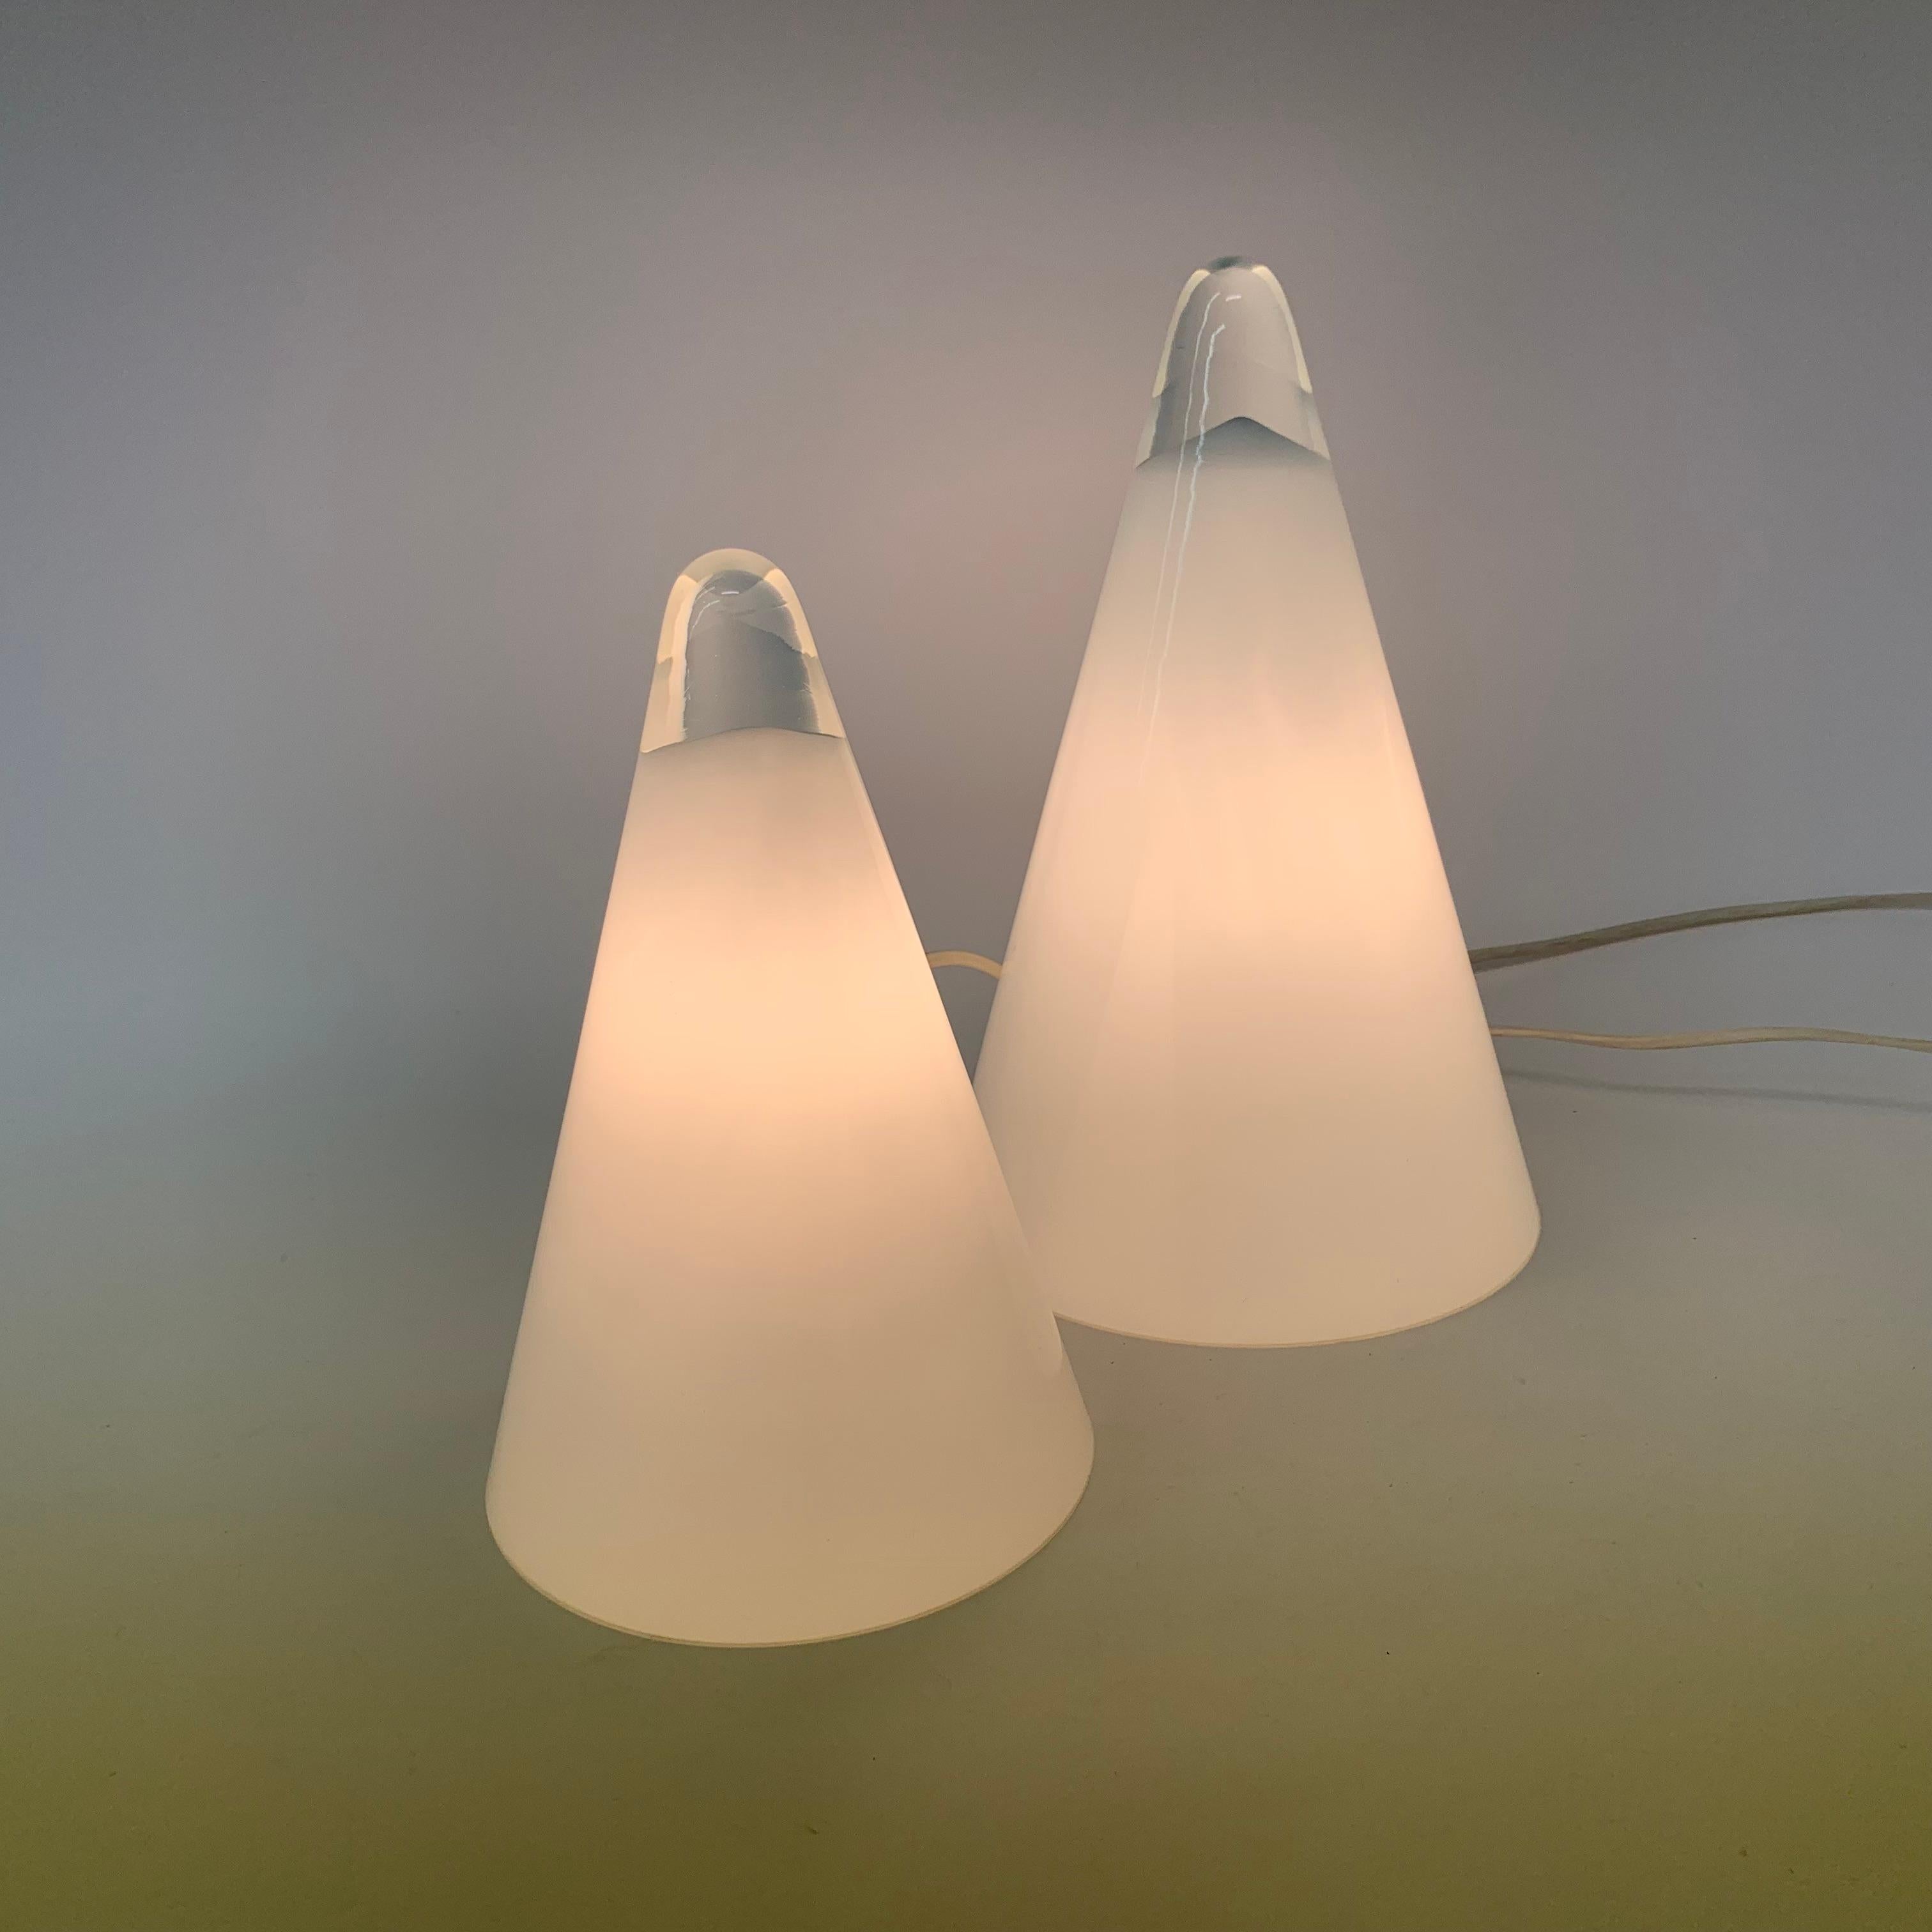 Set of 2 Ilu Glass Table Lamps, 1970's For Sale 8